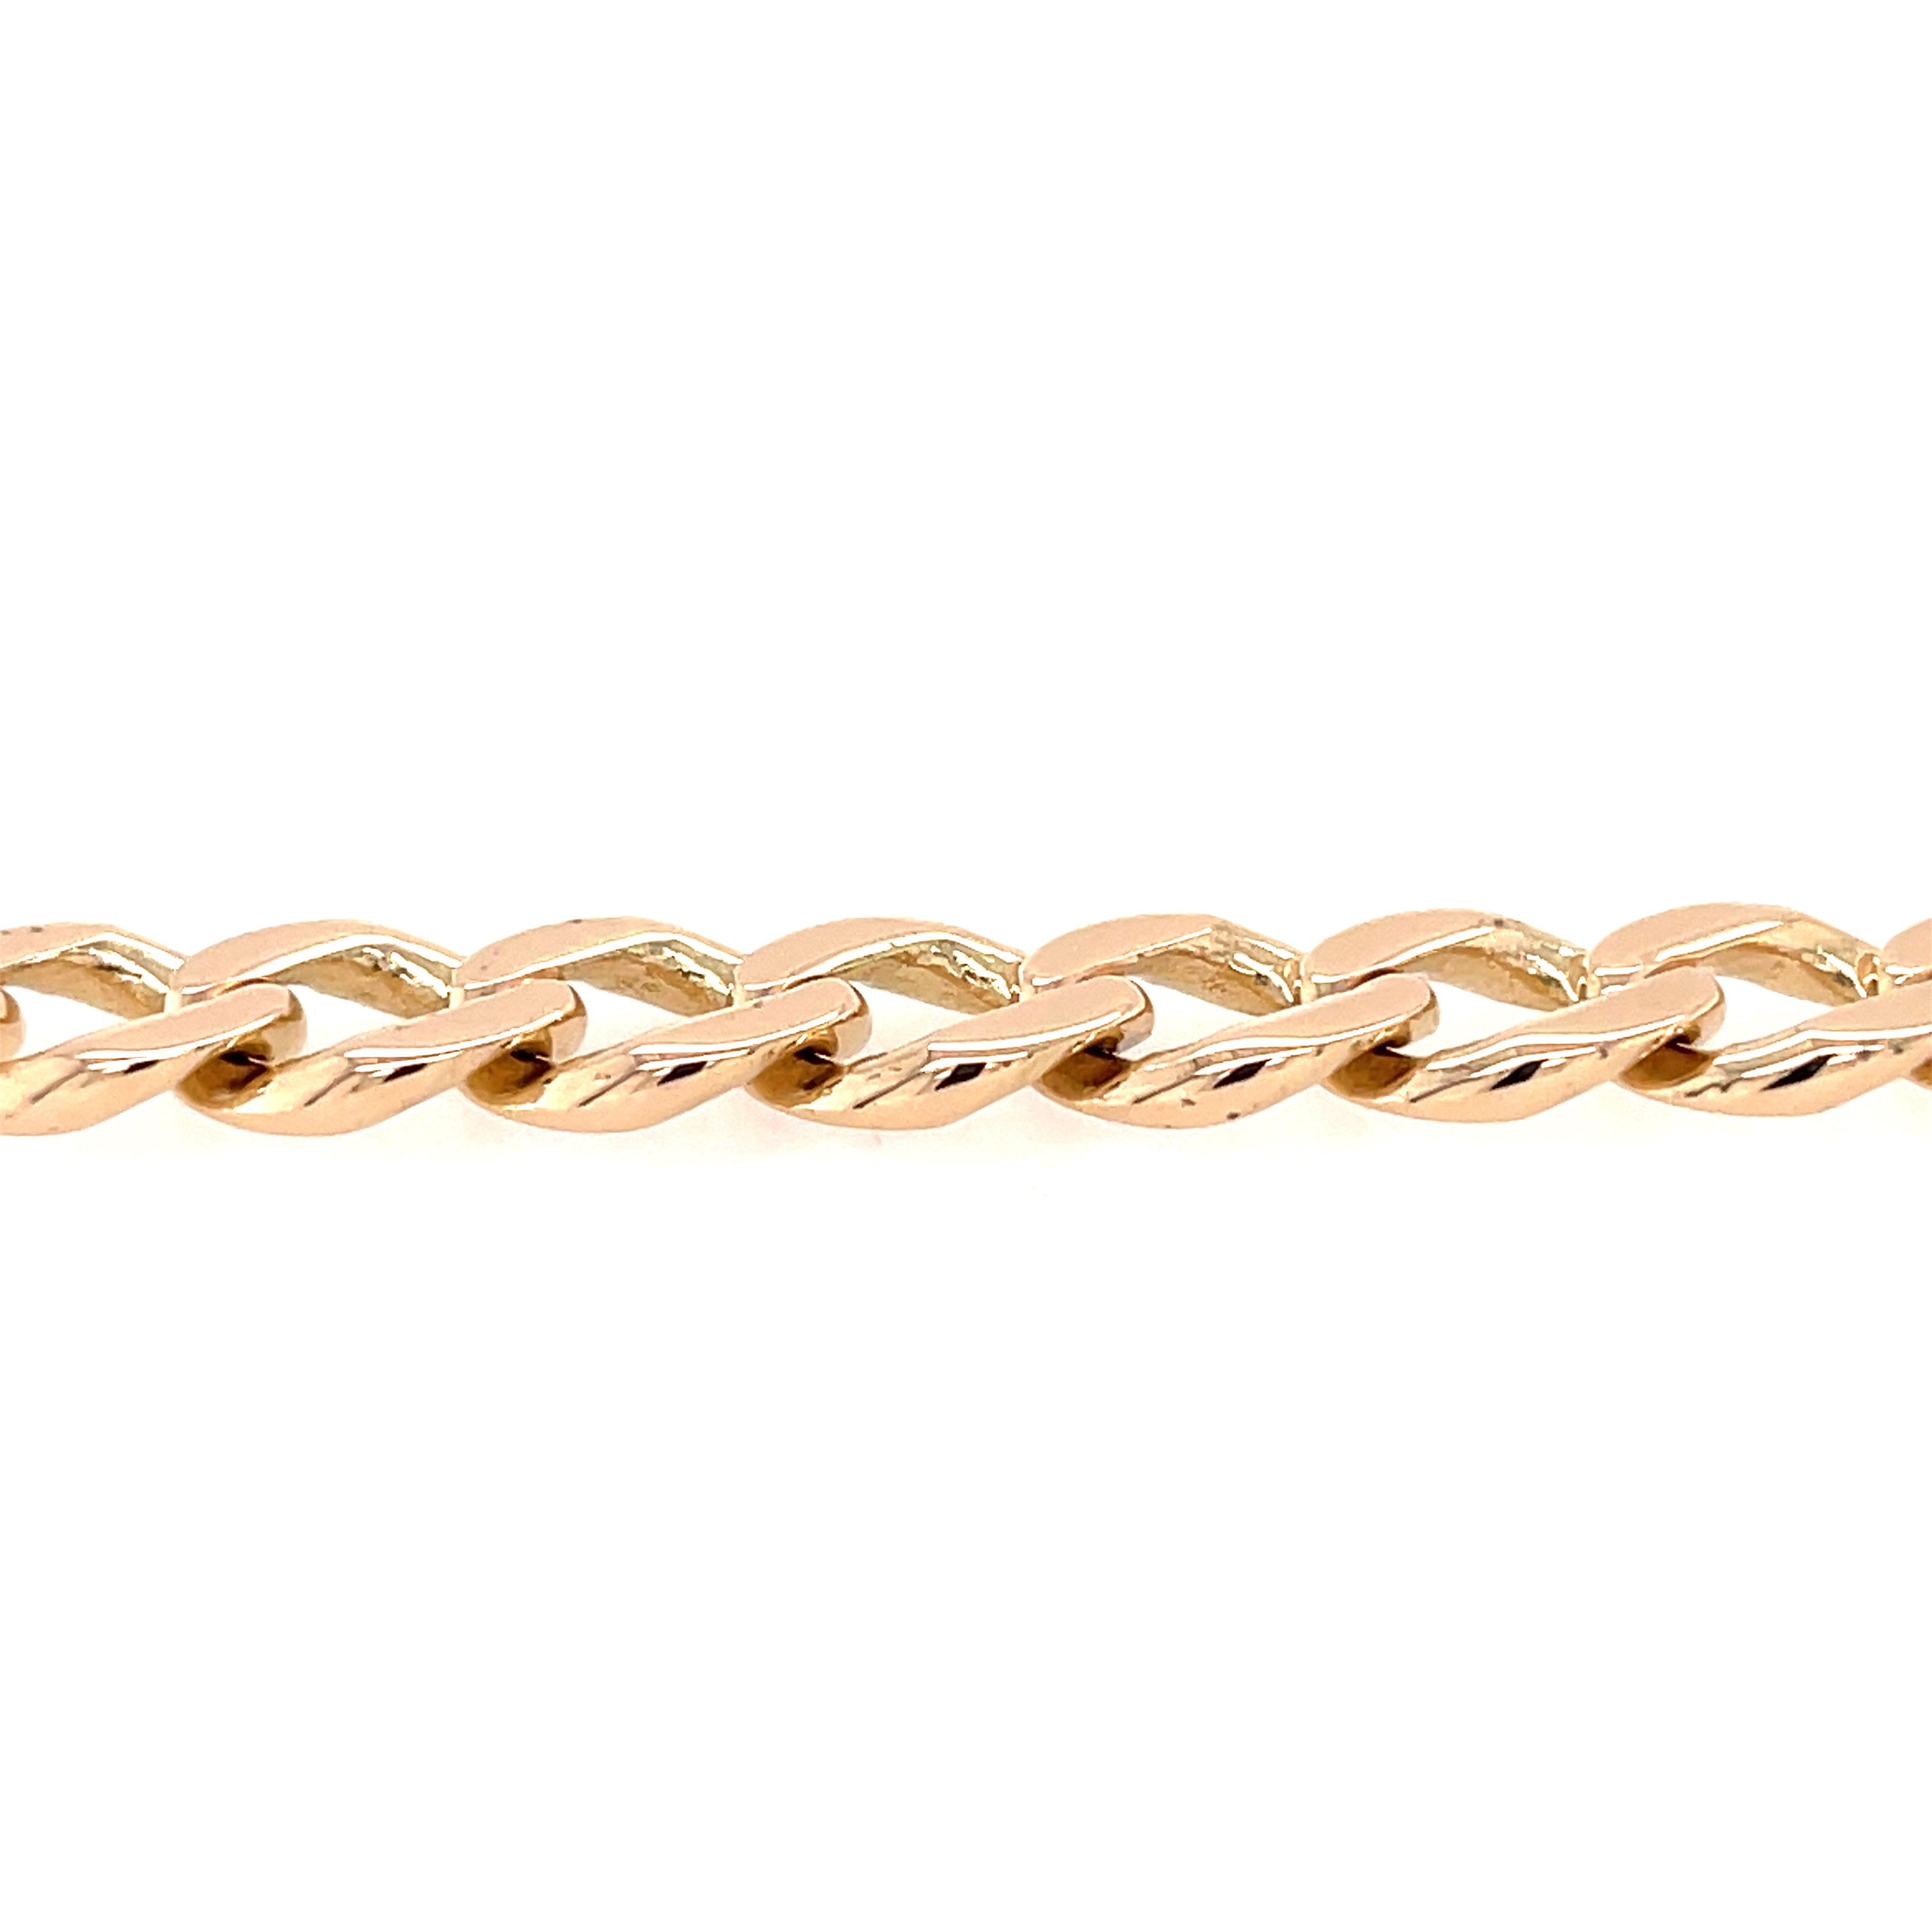 9ct Yellow Gold 9.5 Inch Curb Link Bracelet - 25.86g